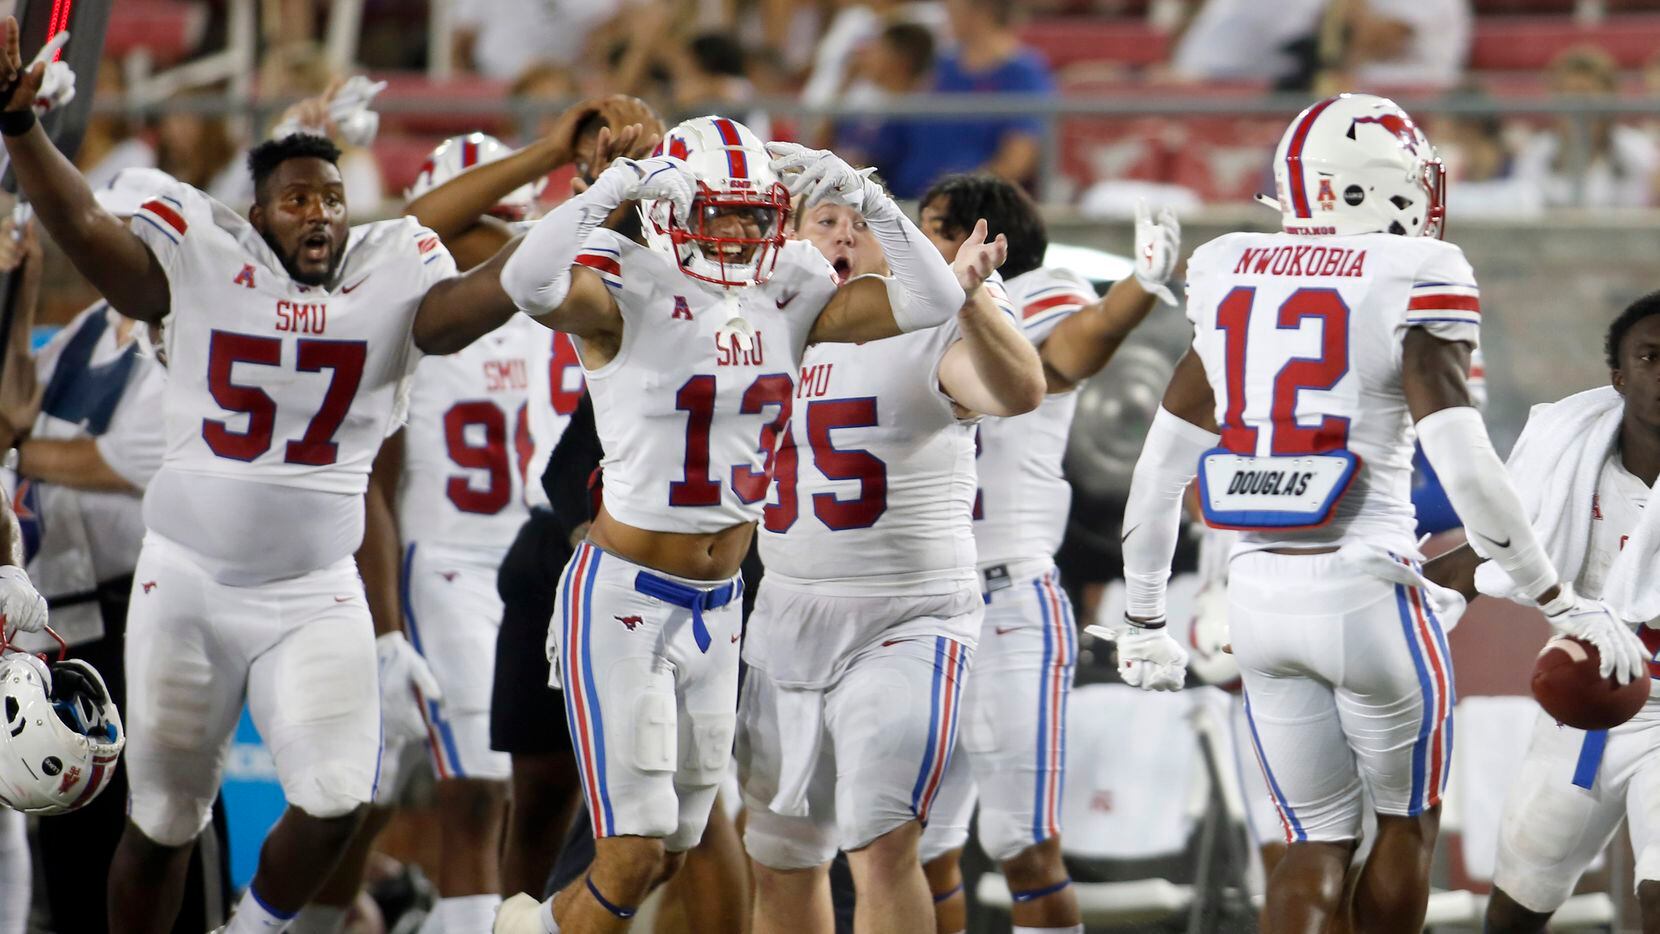 SMU safety Isaiah Nwokobia (12), right, ignites the Mustangs sidelines after intercepting a pass during second half action against Abilene Christian University. The two teams played their season opening football game at SMU's Ford Stadium in Dallas on September 4, 2021. (Steve Hamm/ Special Contributor)